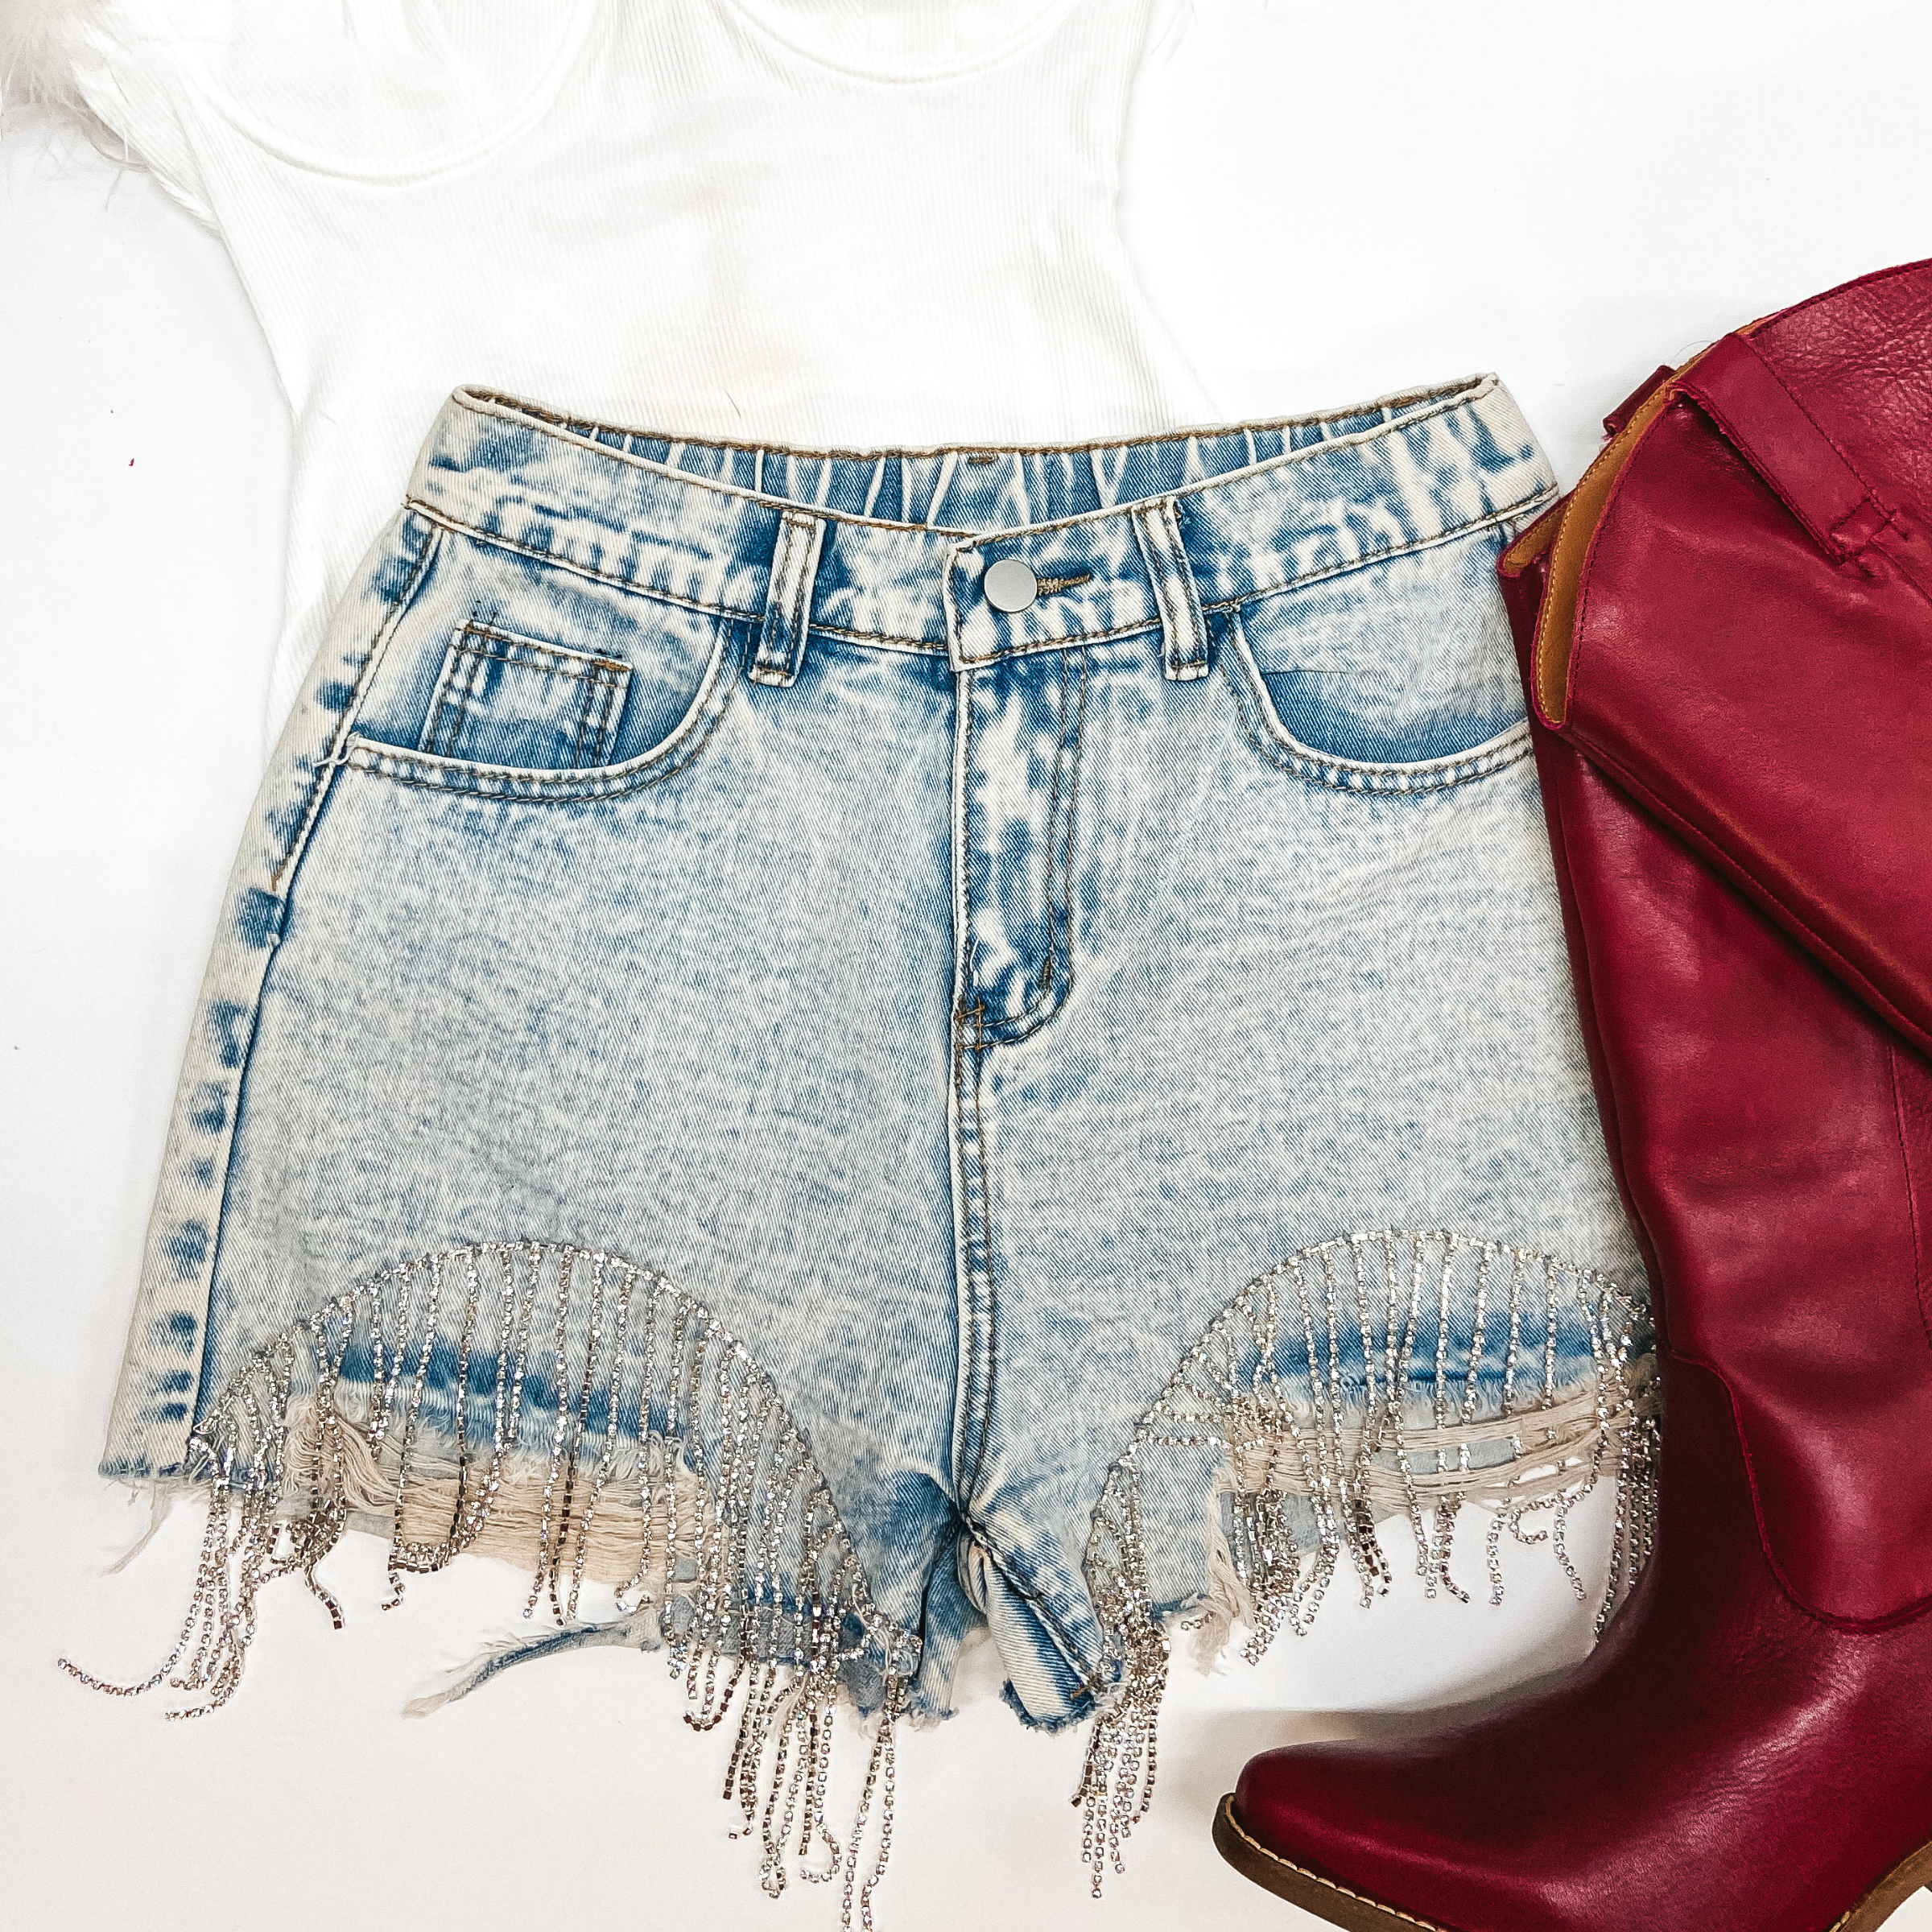 Light-wash denim shorts are centered in the middle of the picture with crystal fringe around the bottom. Red boots aew to the right of the shorts. All on a white background. 